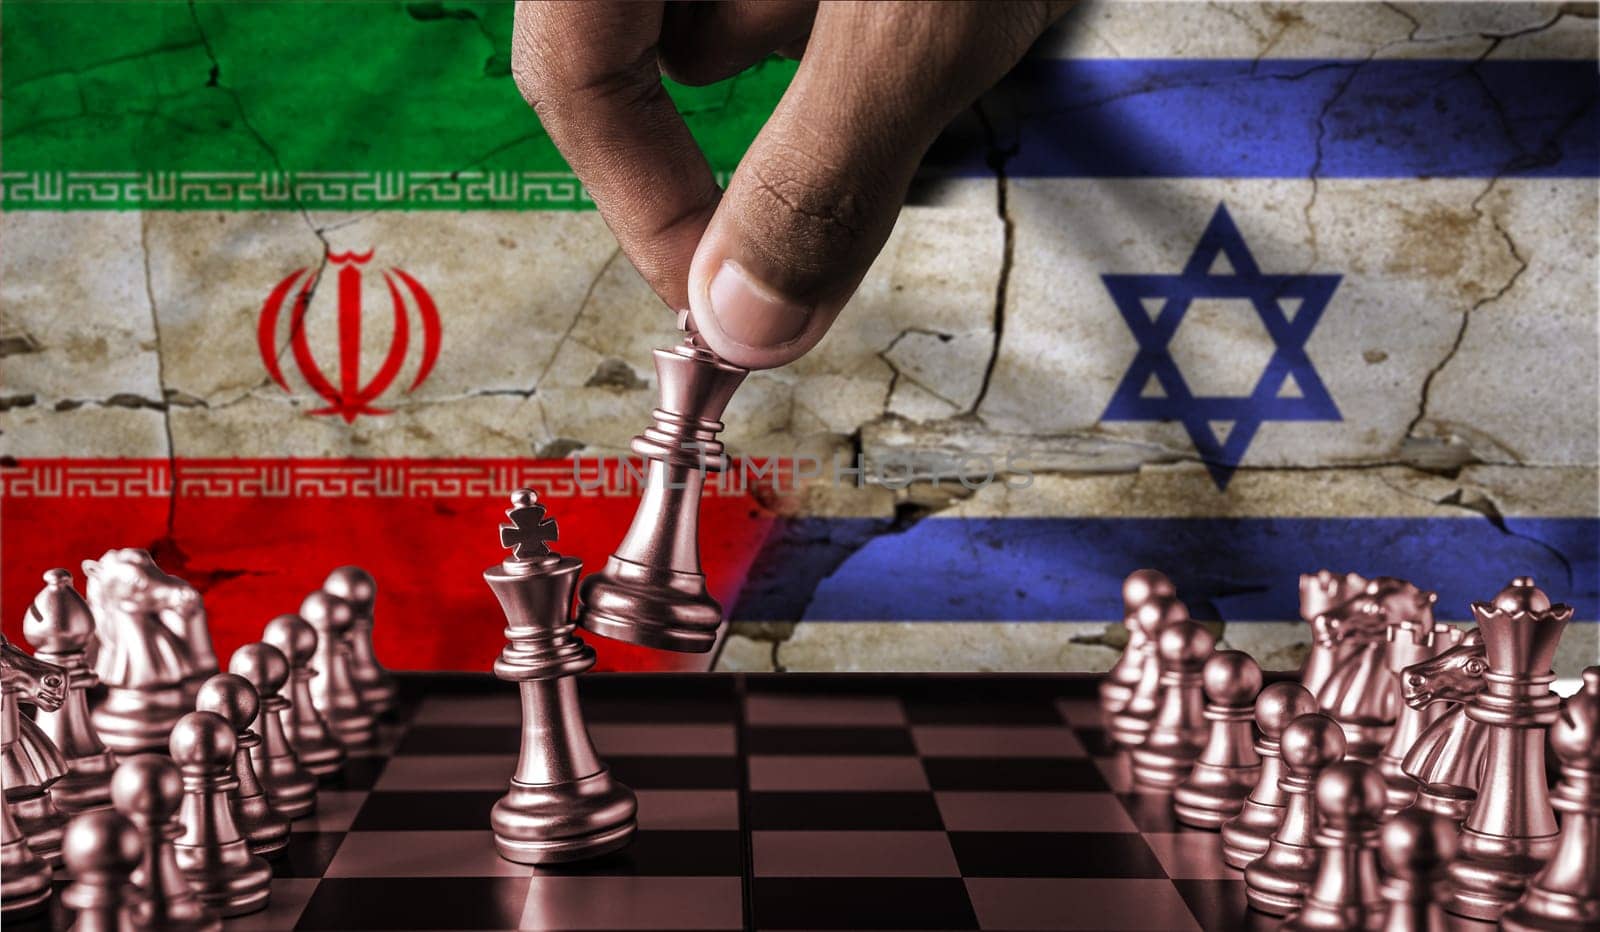 Israel vs Iran flag concept on chessboard. Political tension between Iran and Israel. Conflict between Israel and Iran on pieces of chessboard